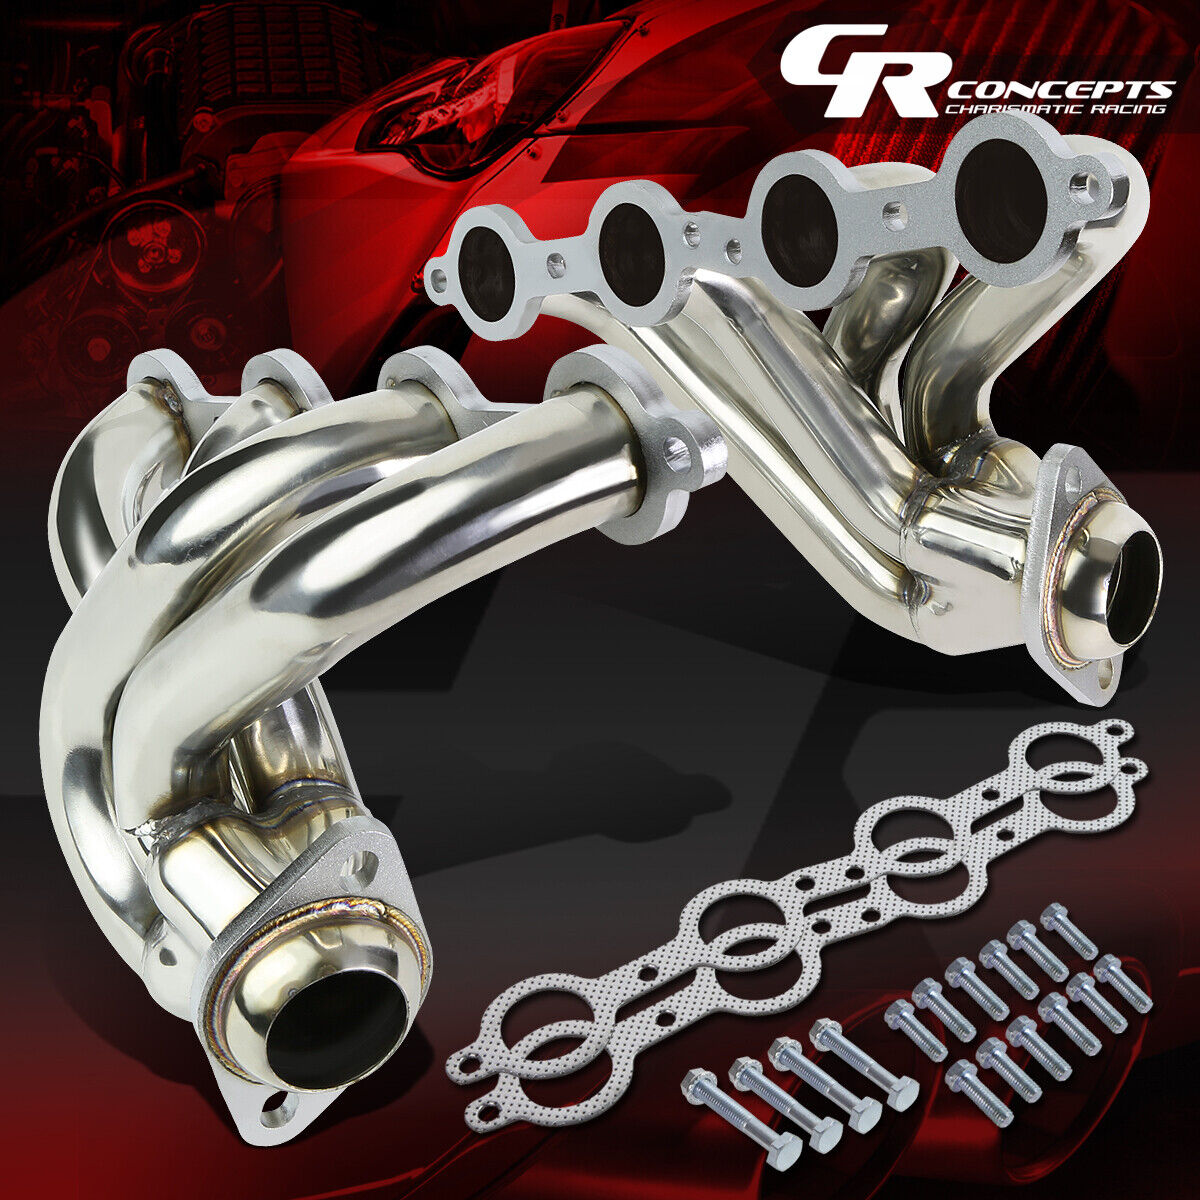 FOR 04-06 PONTIAC GTO 5.7/6.0 V8 STAINLESS STEEL EXHAUST 4-1 MANIFOLD HEADER